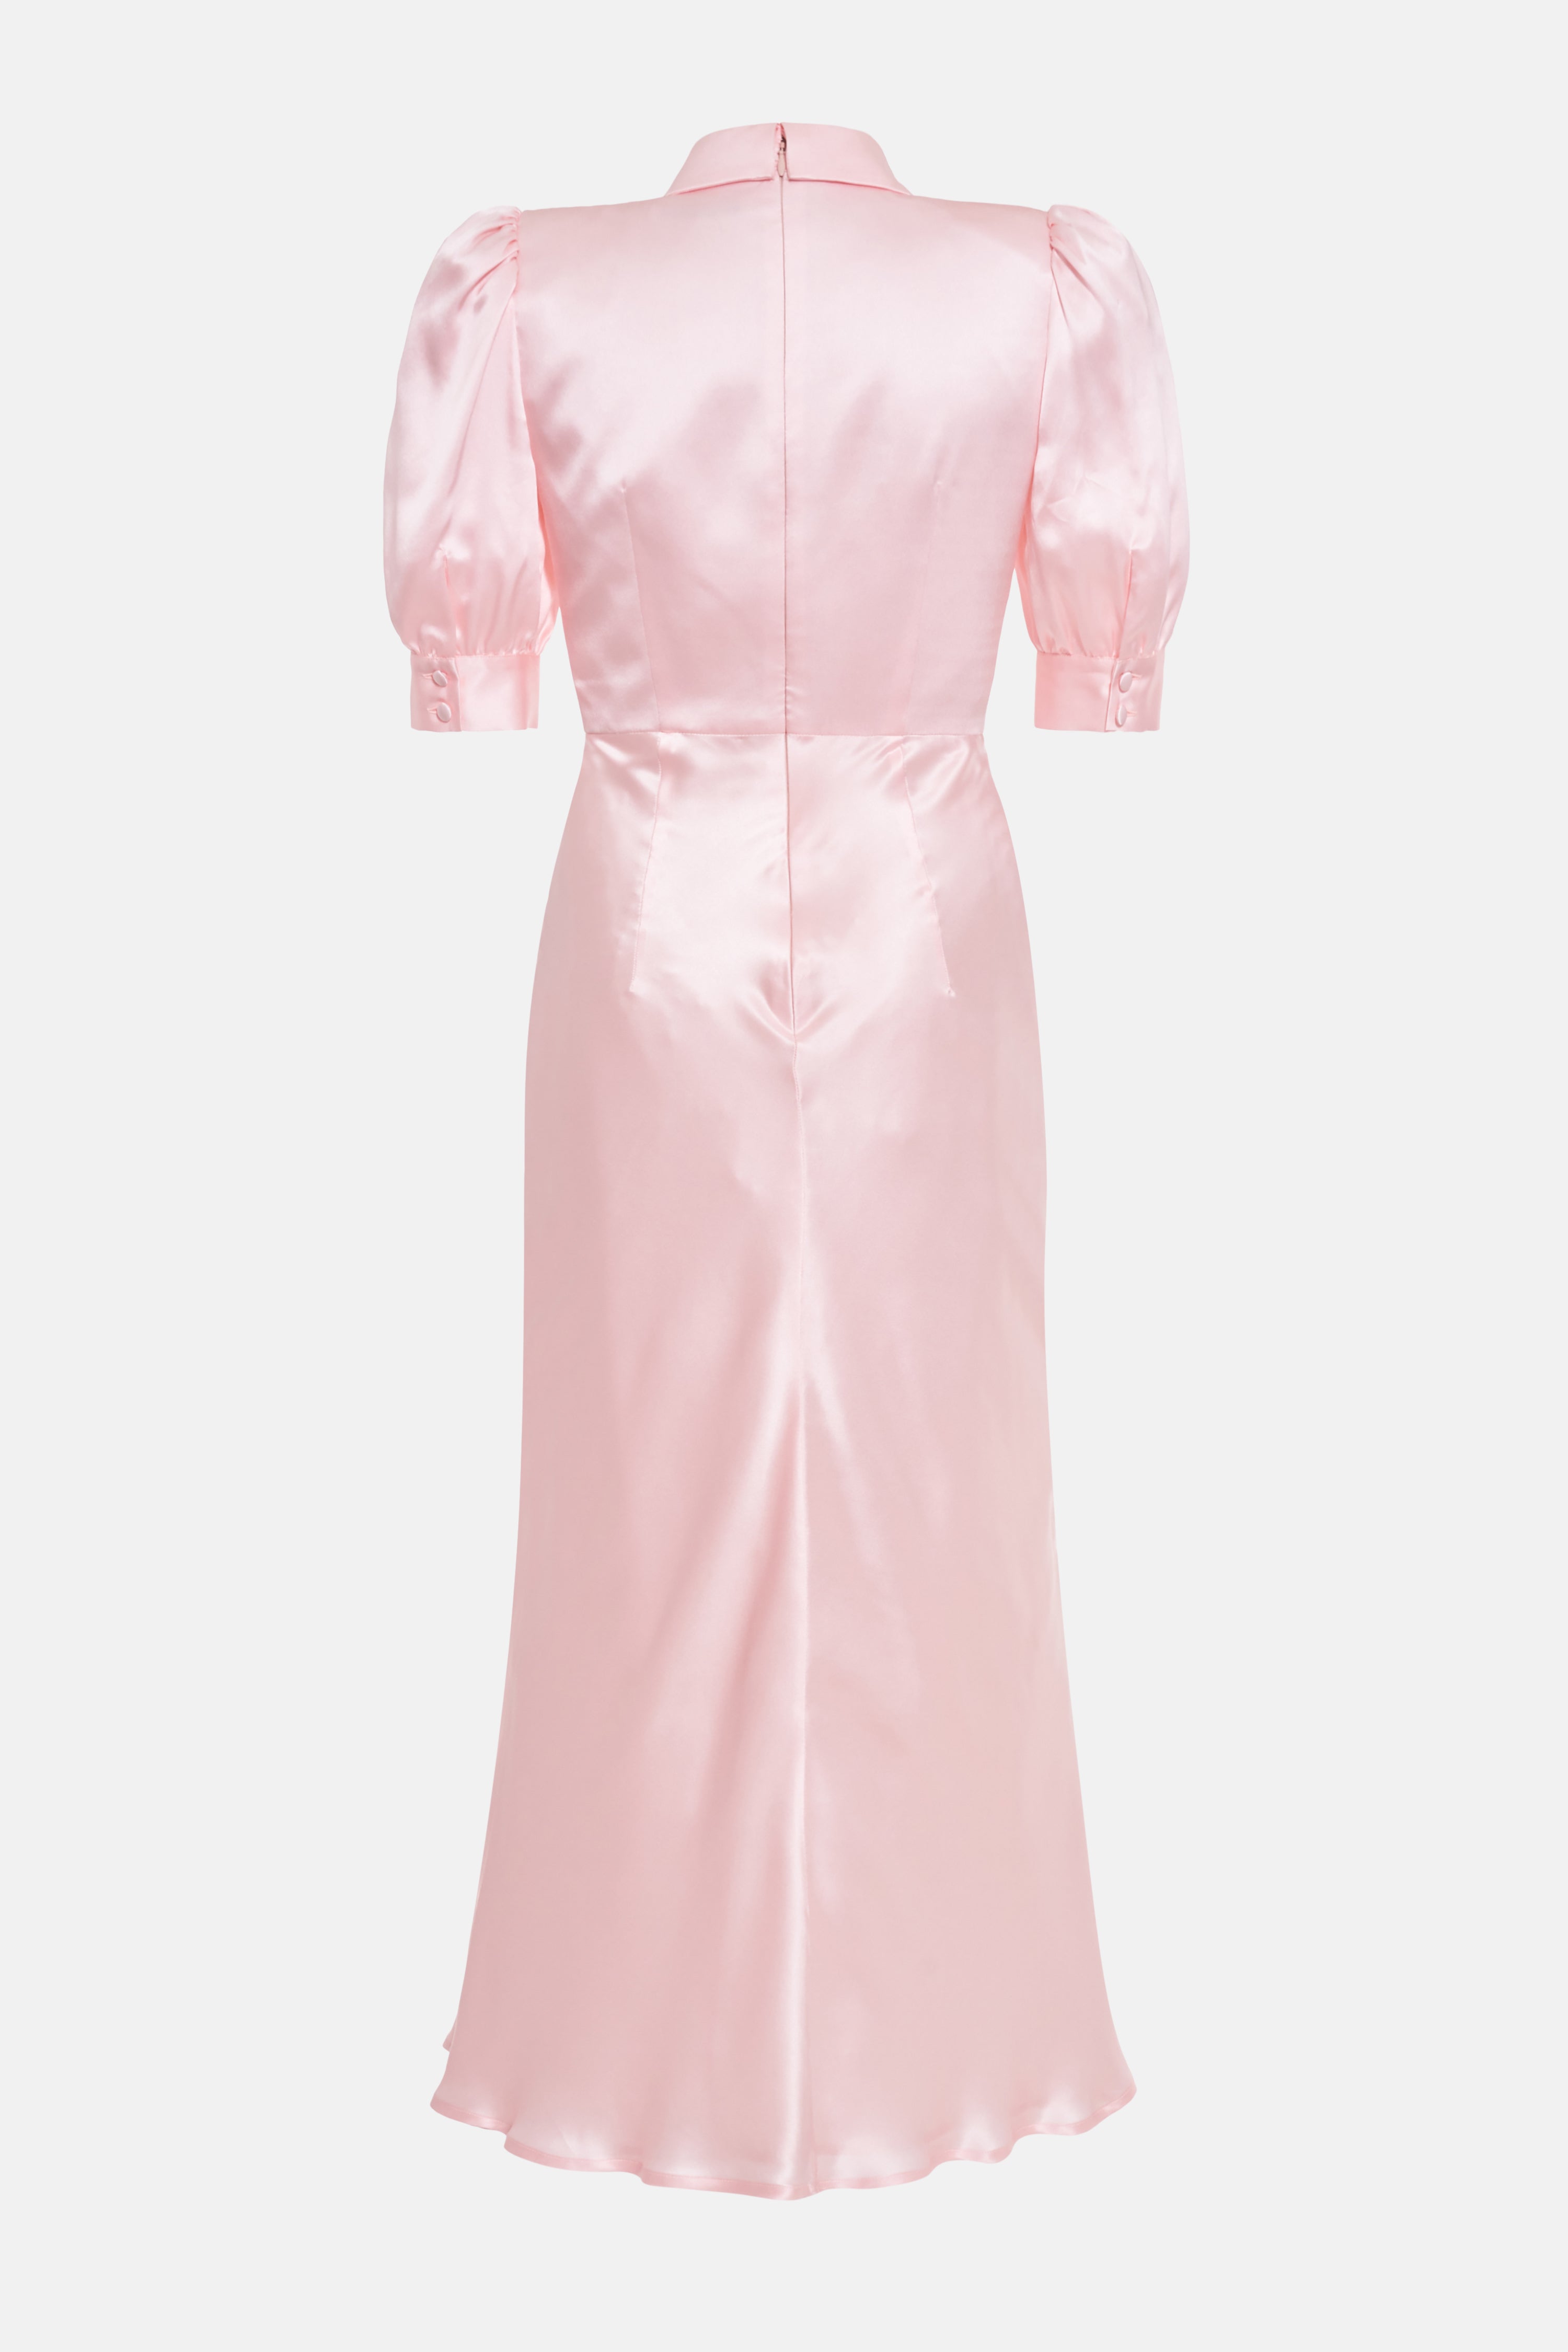 SILK SATIN DRESS WITH COLLAR AND BUTTONS